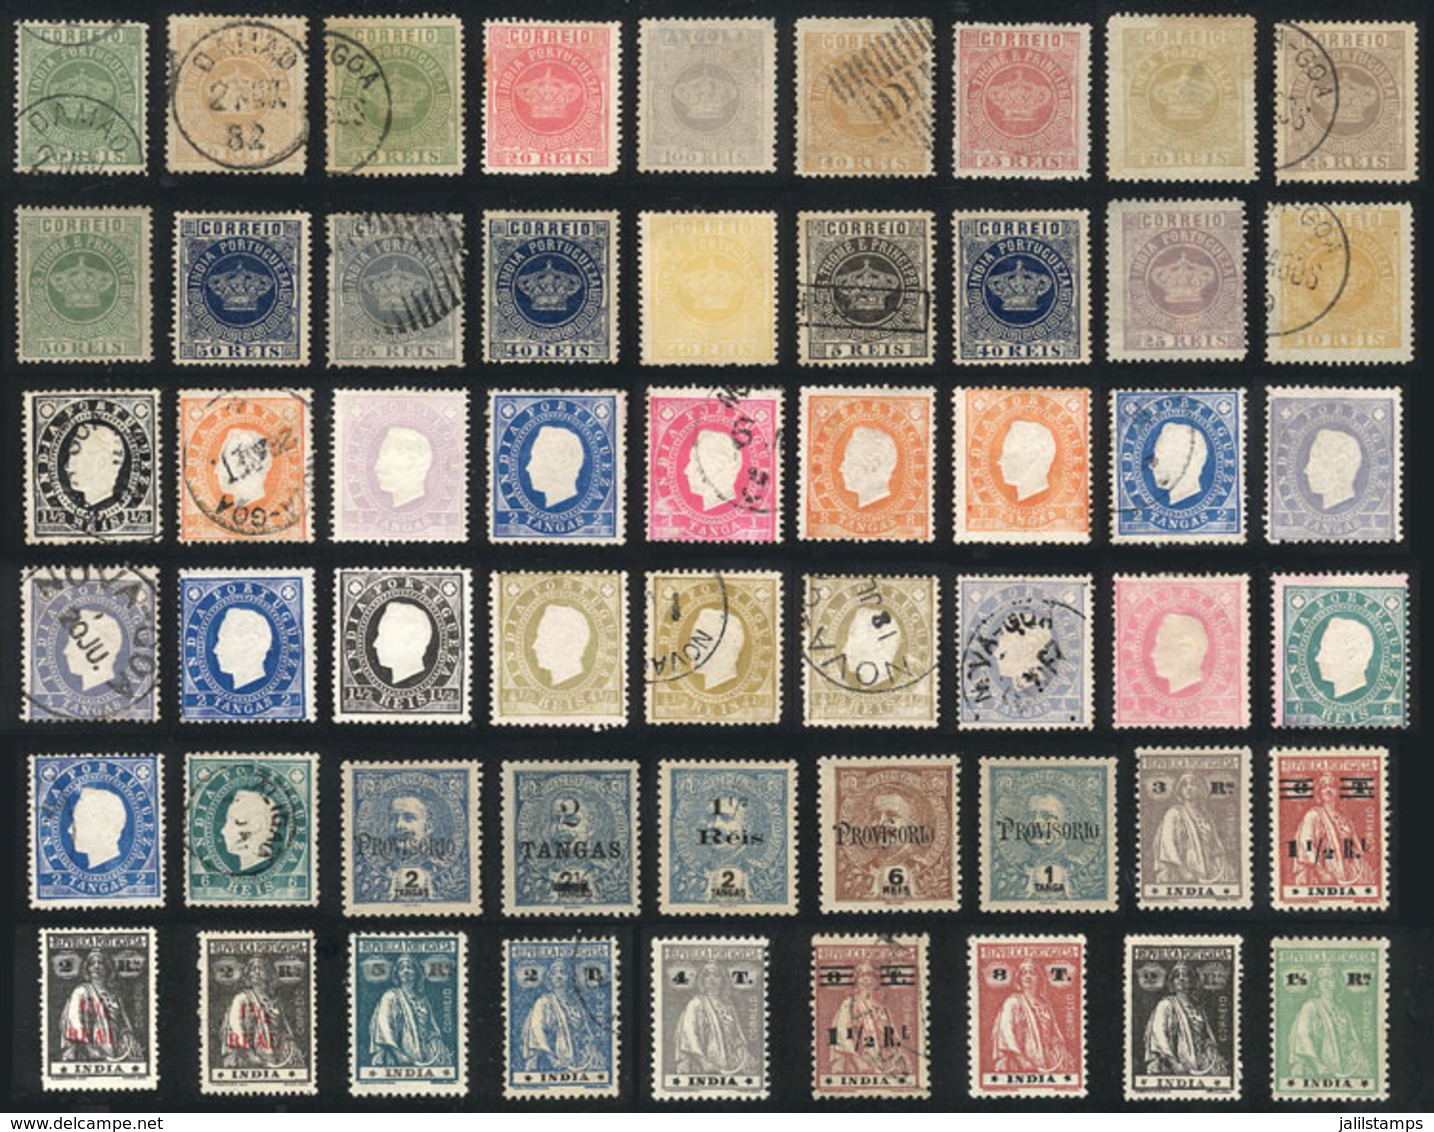 1431 PORTUGUESE INDIA: Interesting Lot Of Old Stamps, Fine General Quality, Scott Catalog Value Is Over US$500, Good Opp - India Portoghese